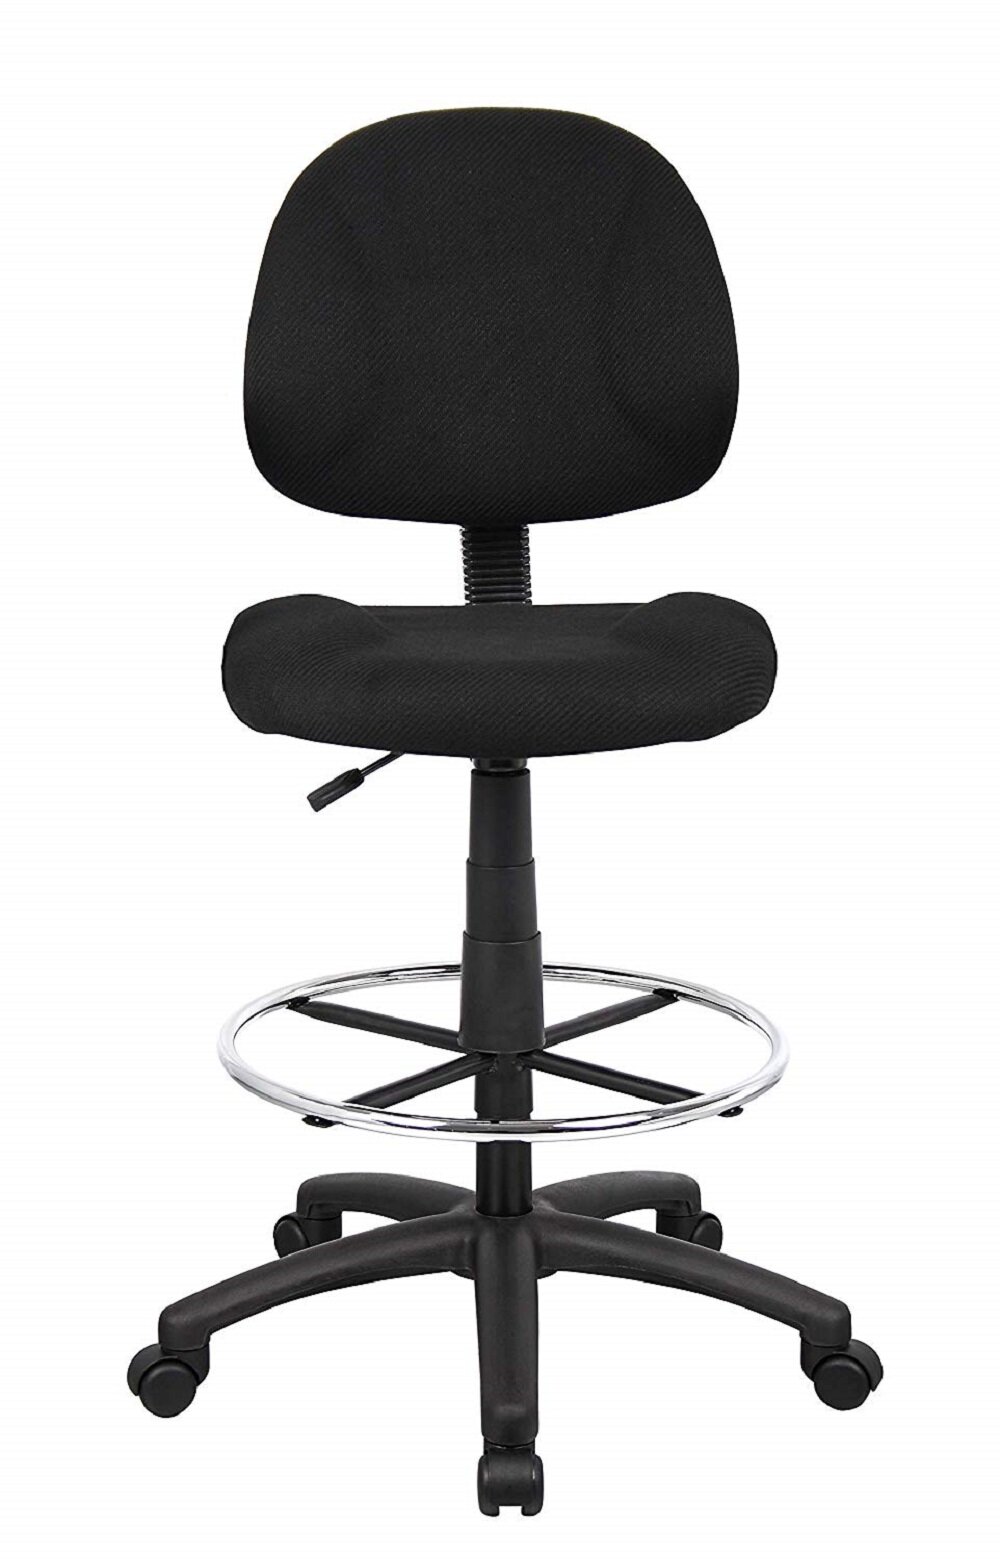 Gymax Swivel Drafting Chair Tall Office Chair w/ Adjustable Backrest - Black